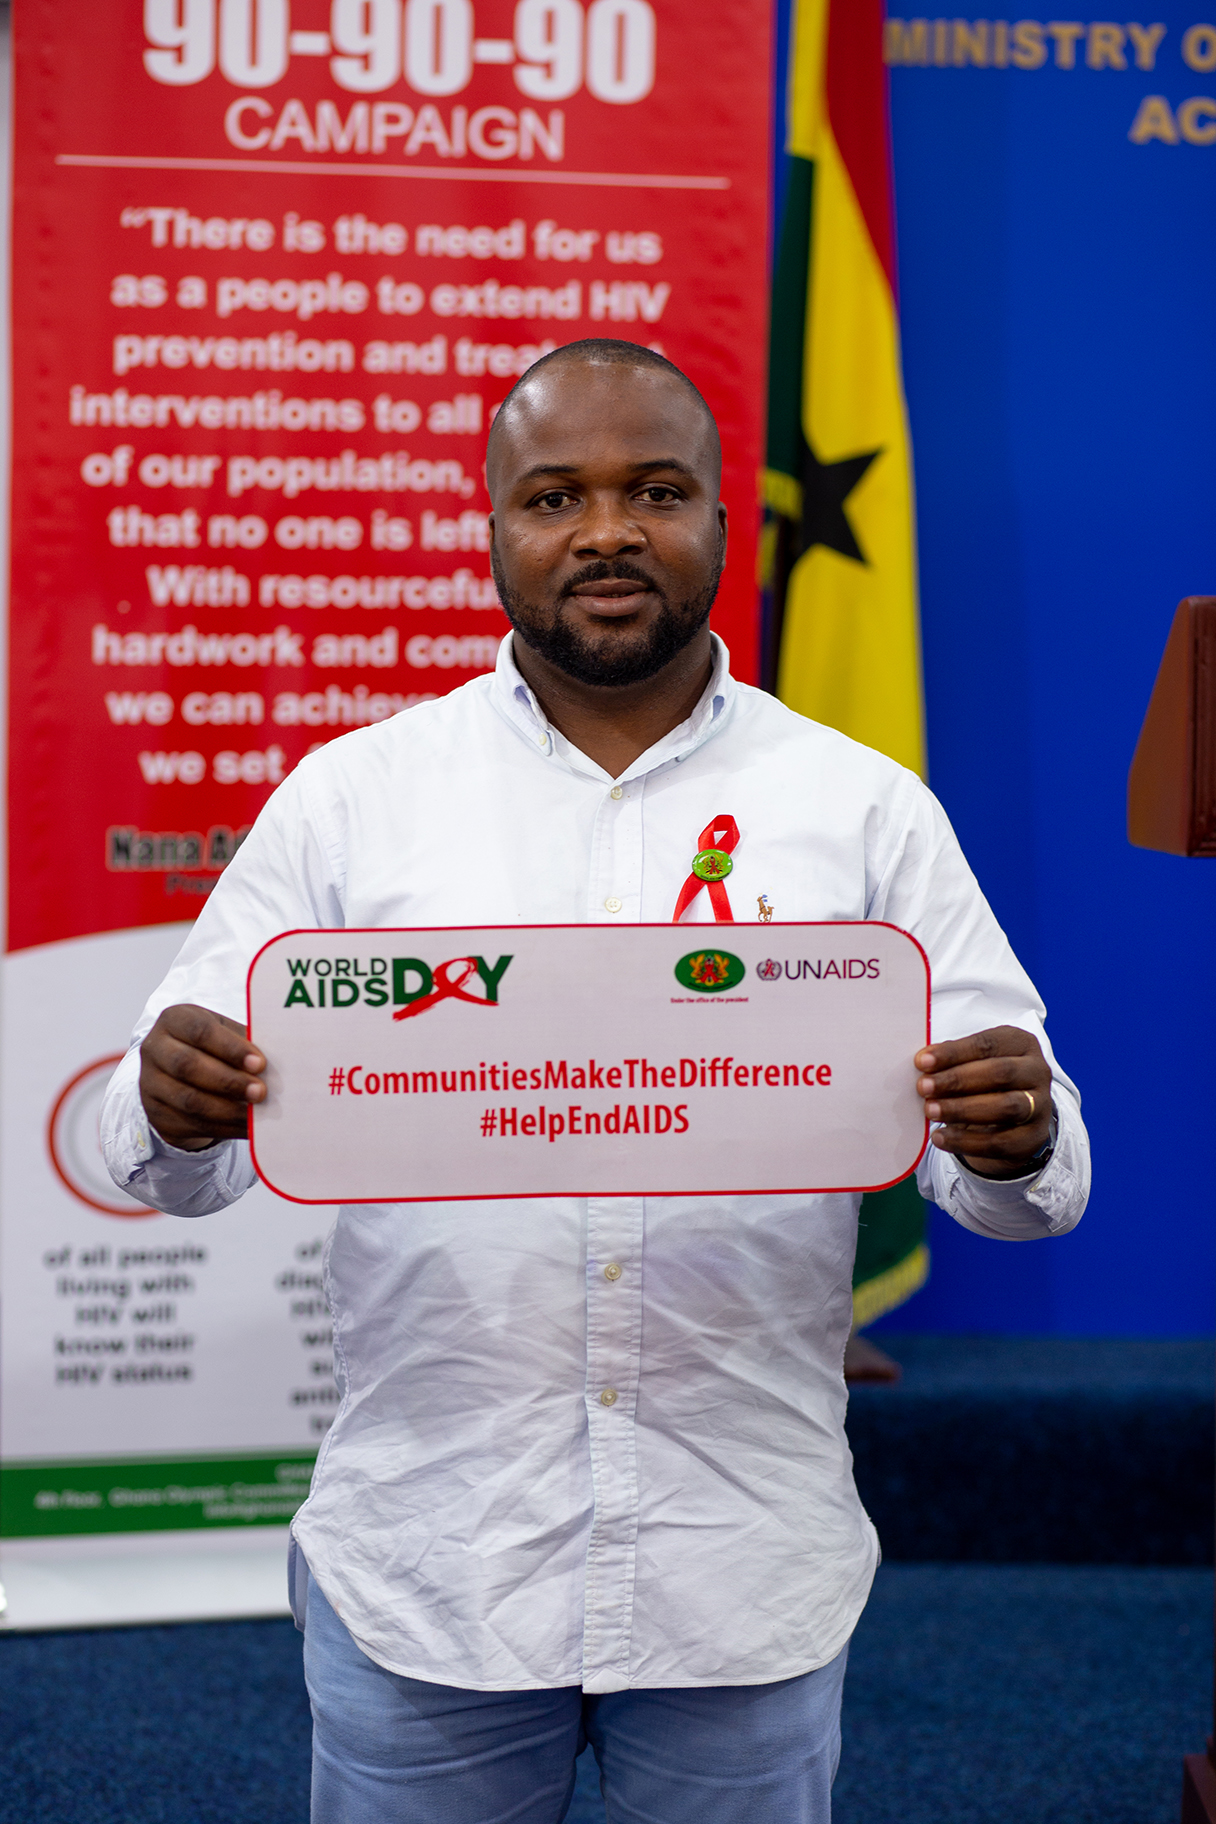 World AIDS Day 2019 HashTag Campaign